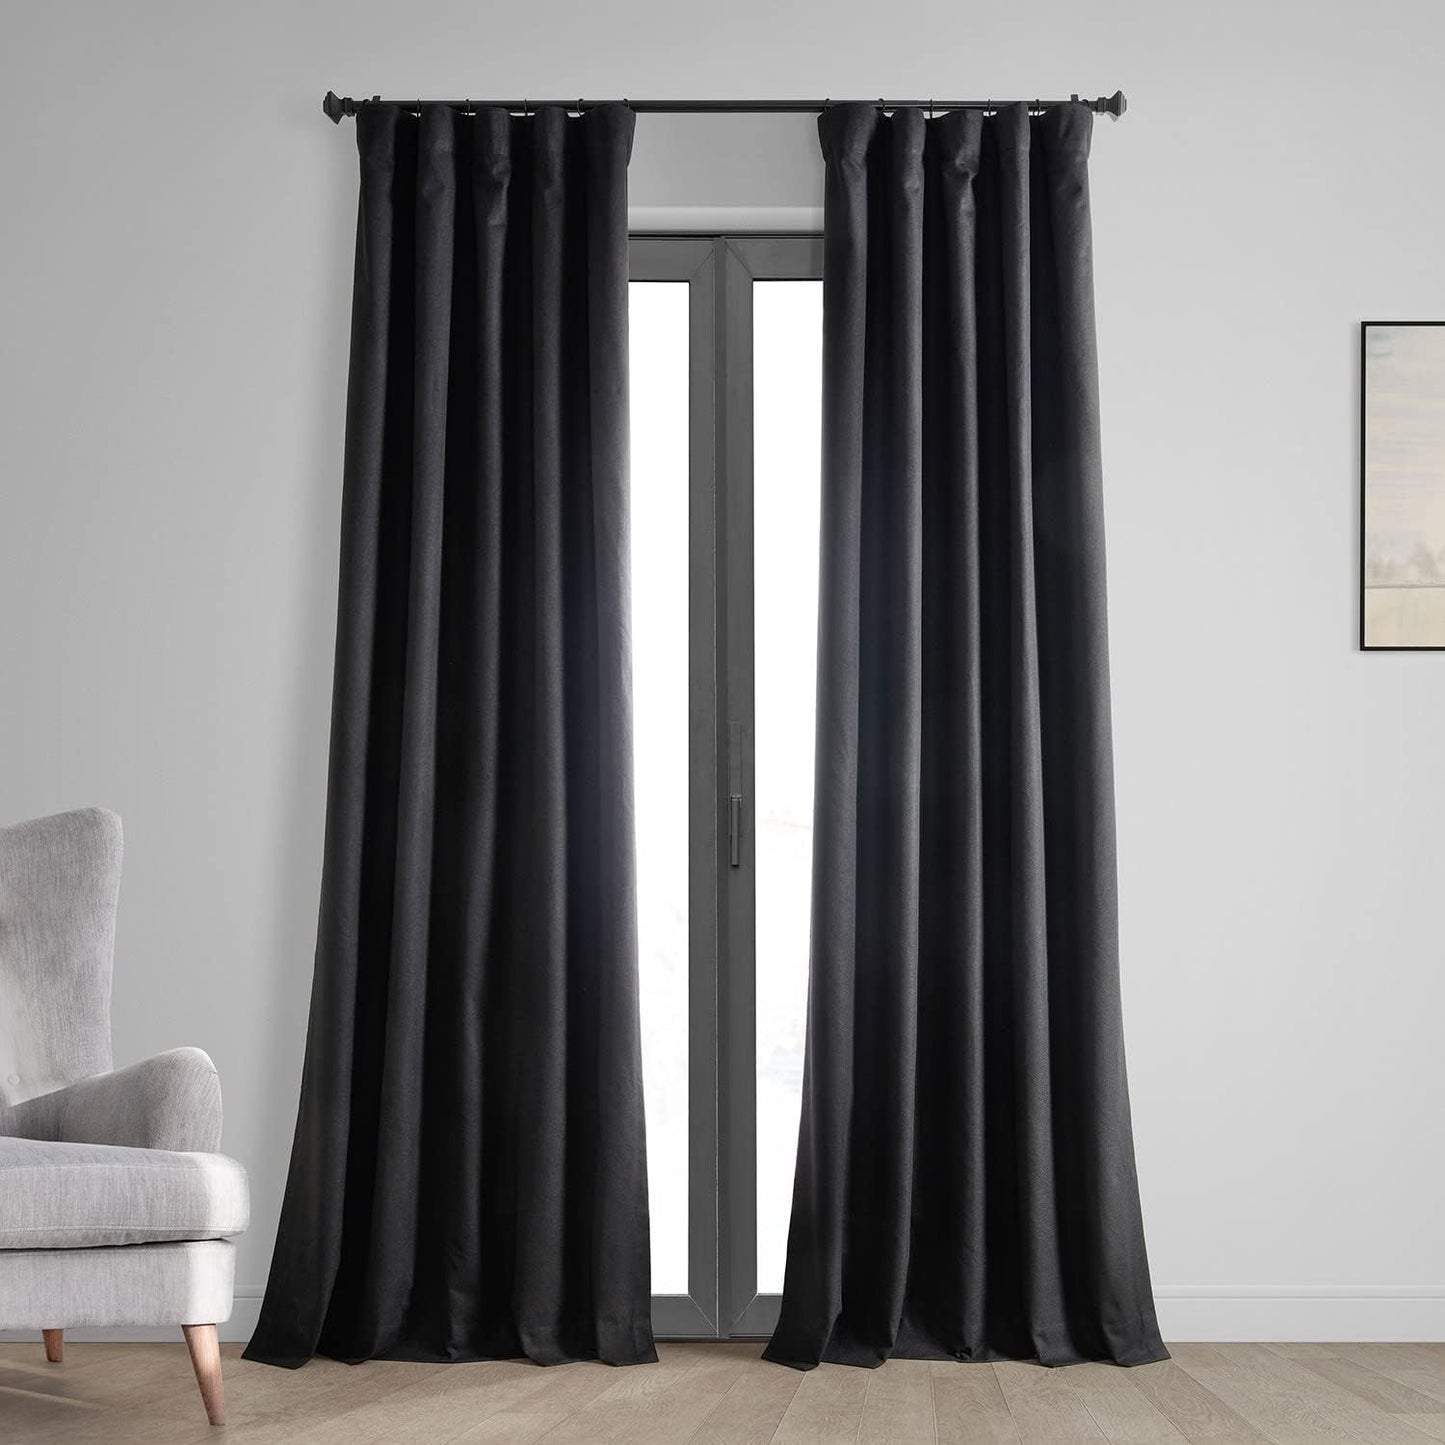 HPD Half Price Drapes Vintage Blackout Curtains for Bedroom - 96 Inches Long Thermal Cross Linen Weave Full Light Blocking 1 Panel Blackout Curtain, (50W X 96L), Millennial Grey  Exclusive Fabrics & Furnishings Black 50W X 108L 